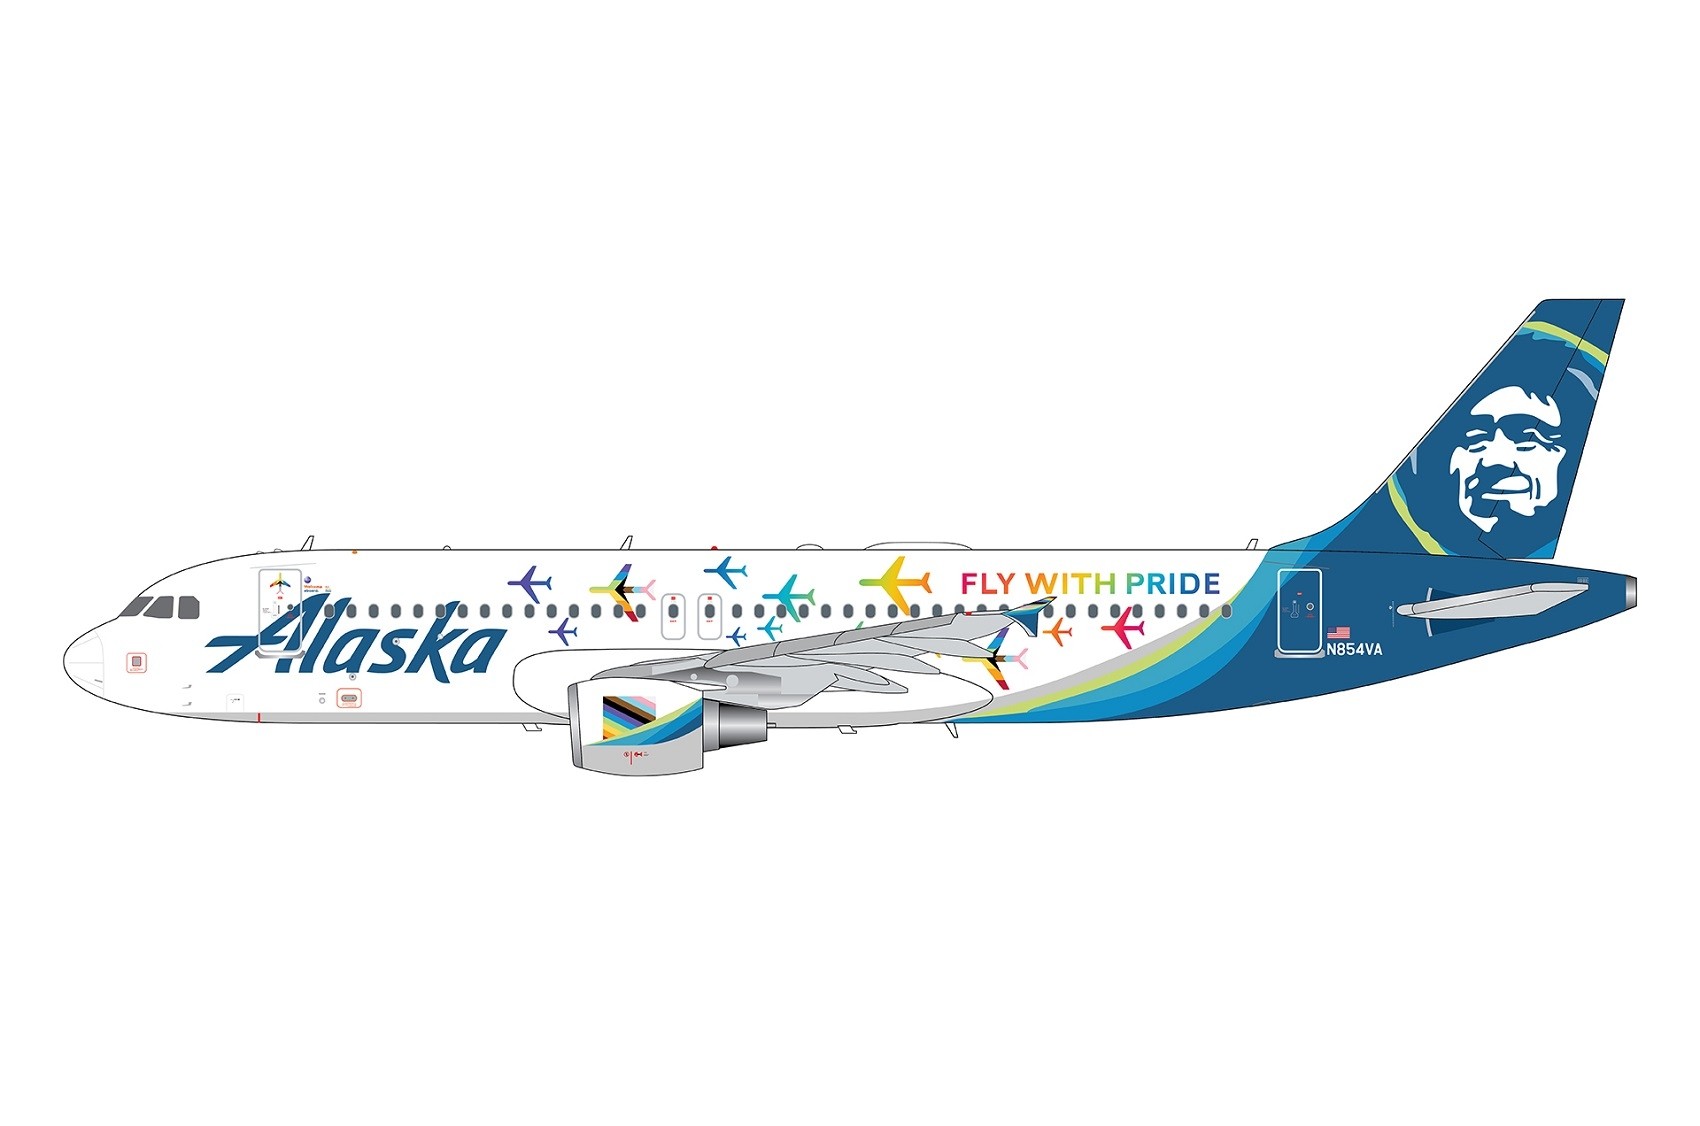 Alaska Airbus A320-200 N854VA “Fly With Pride” livery Gemini Jets